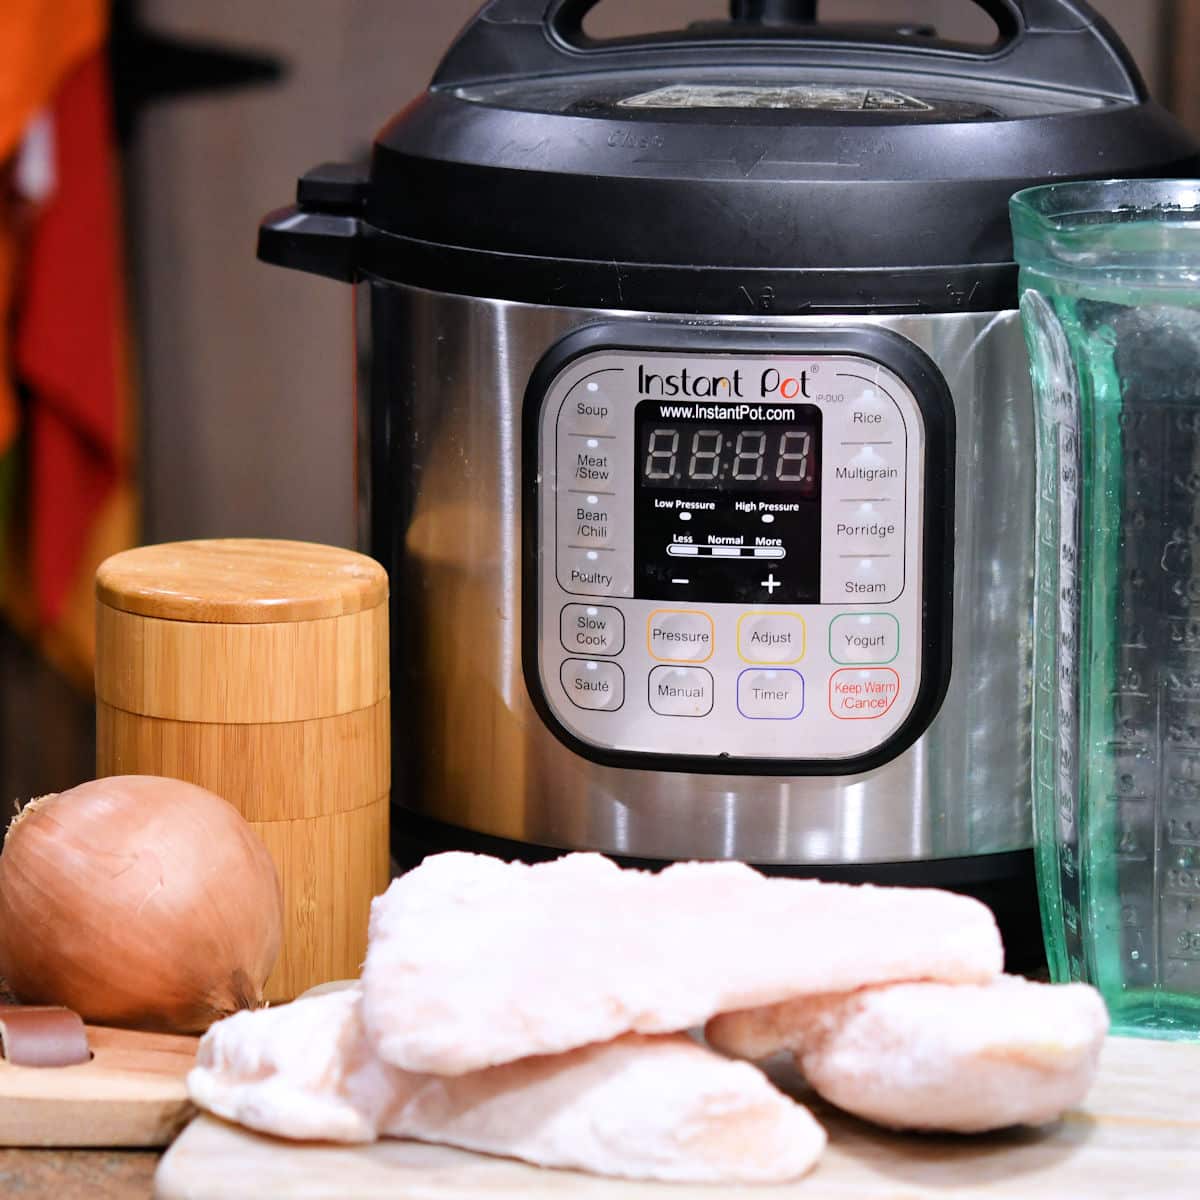 frozen chicken breasts, onion on a countertop in front of an Instant Pot pressure cooker